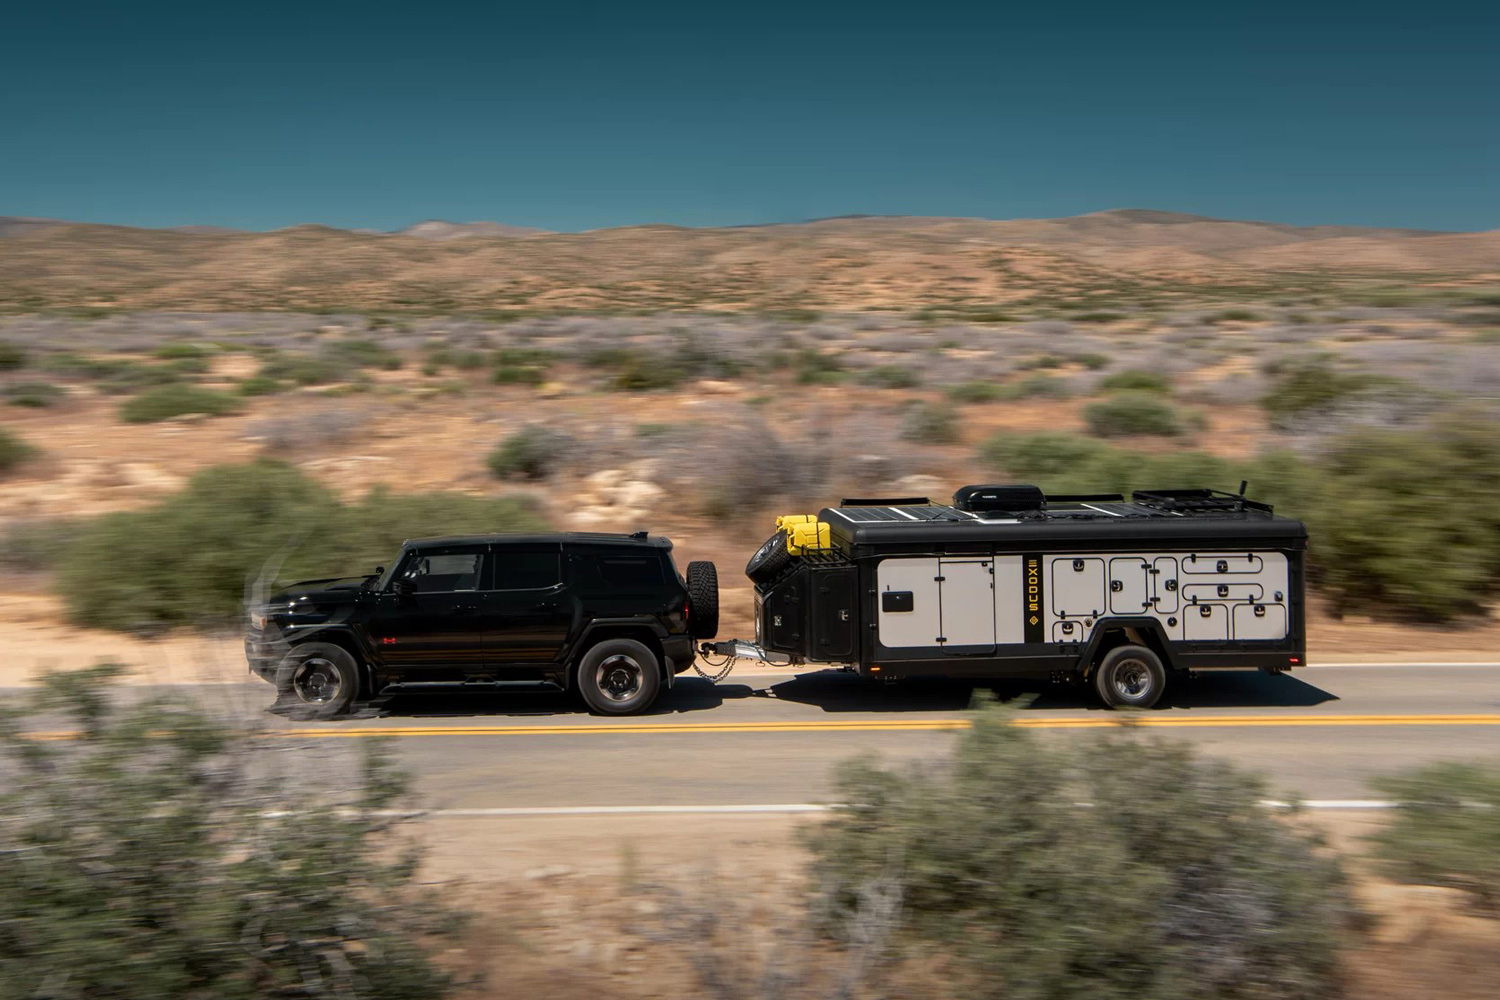 Exodus Capax travel trailer being towed by a black SUV down a desert highway.